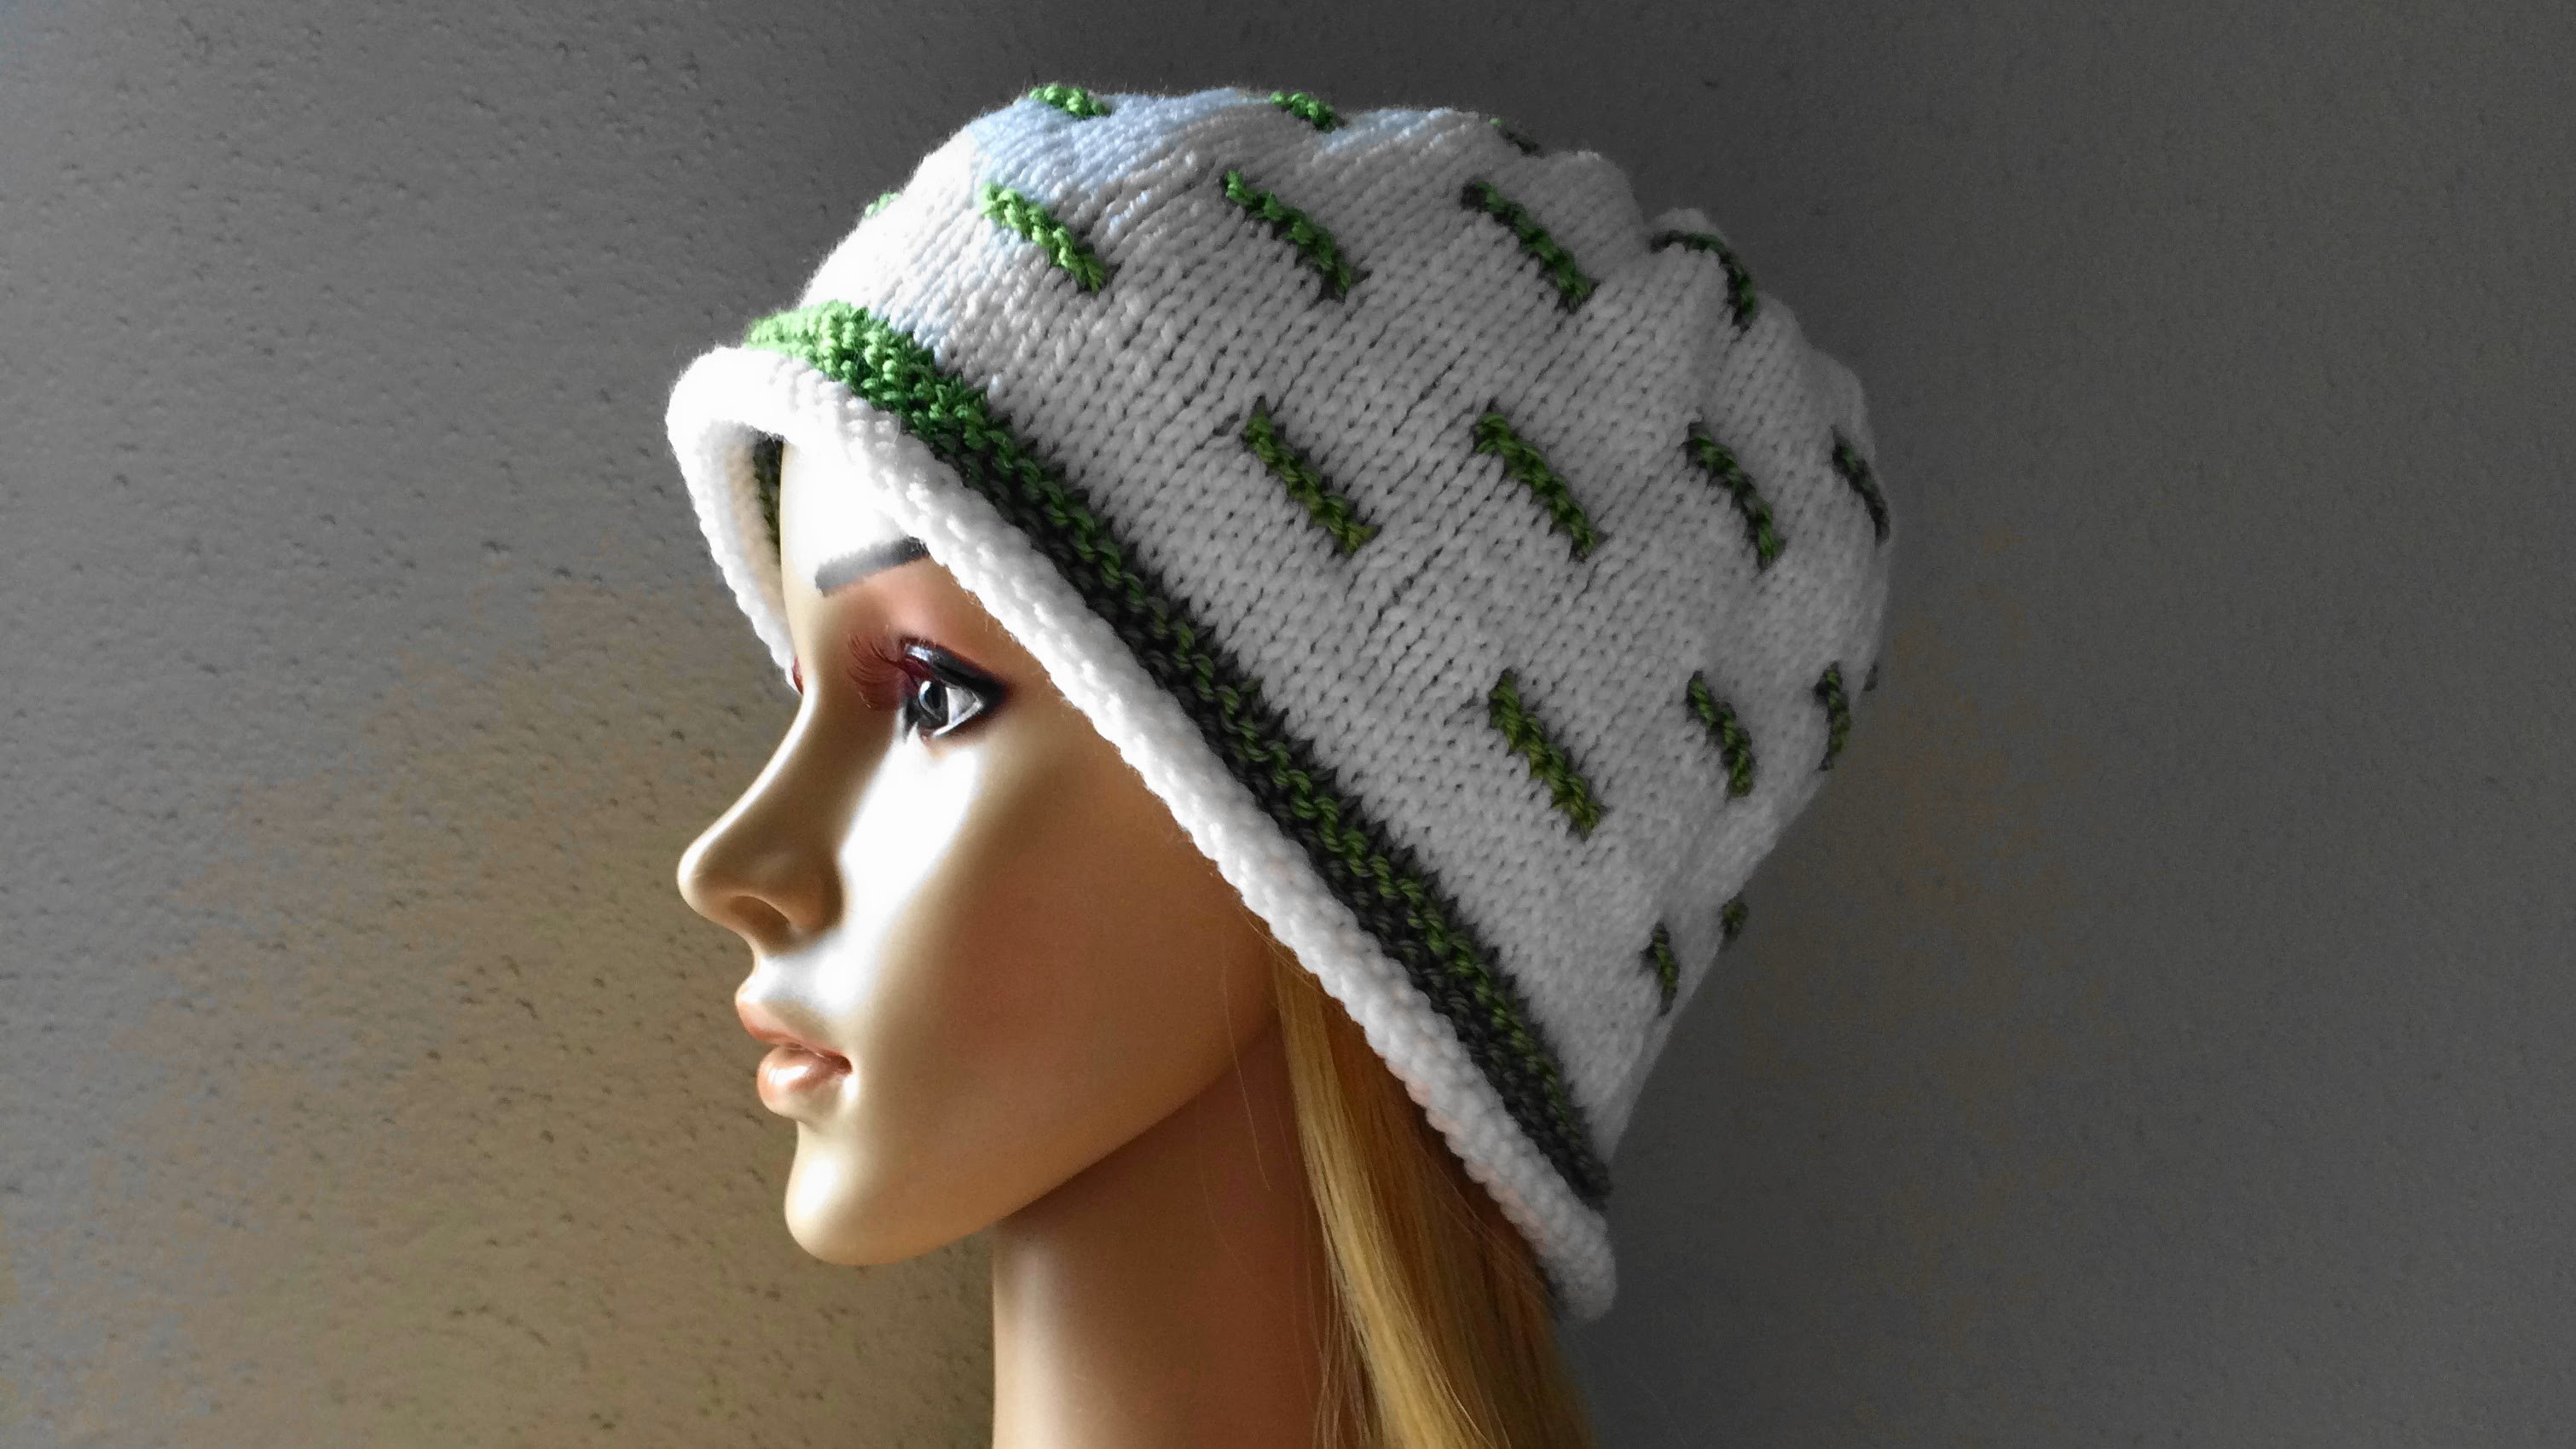 How To Knit A White And Green Hat, Lilu's Knitting Corner Video # 18